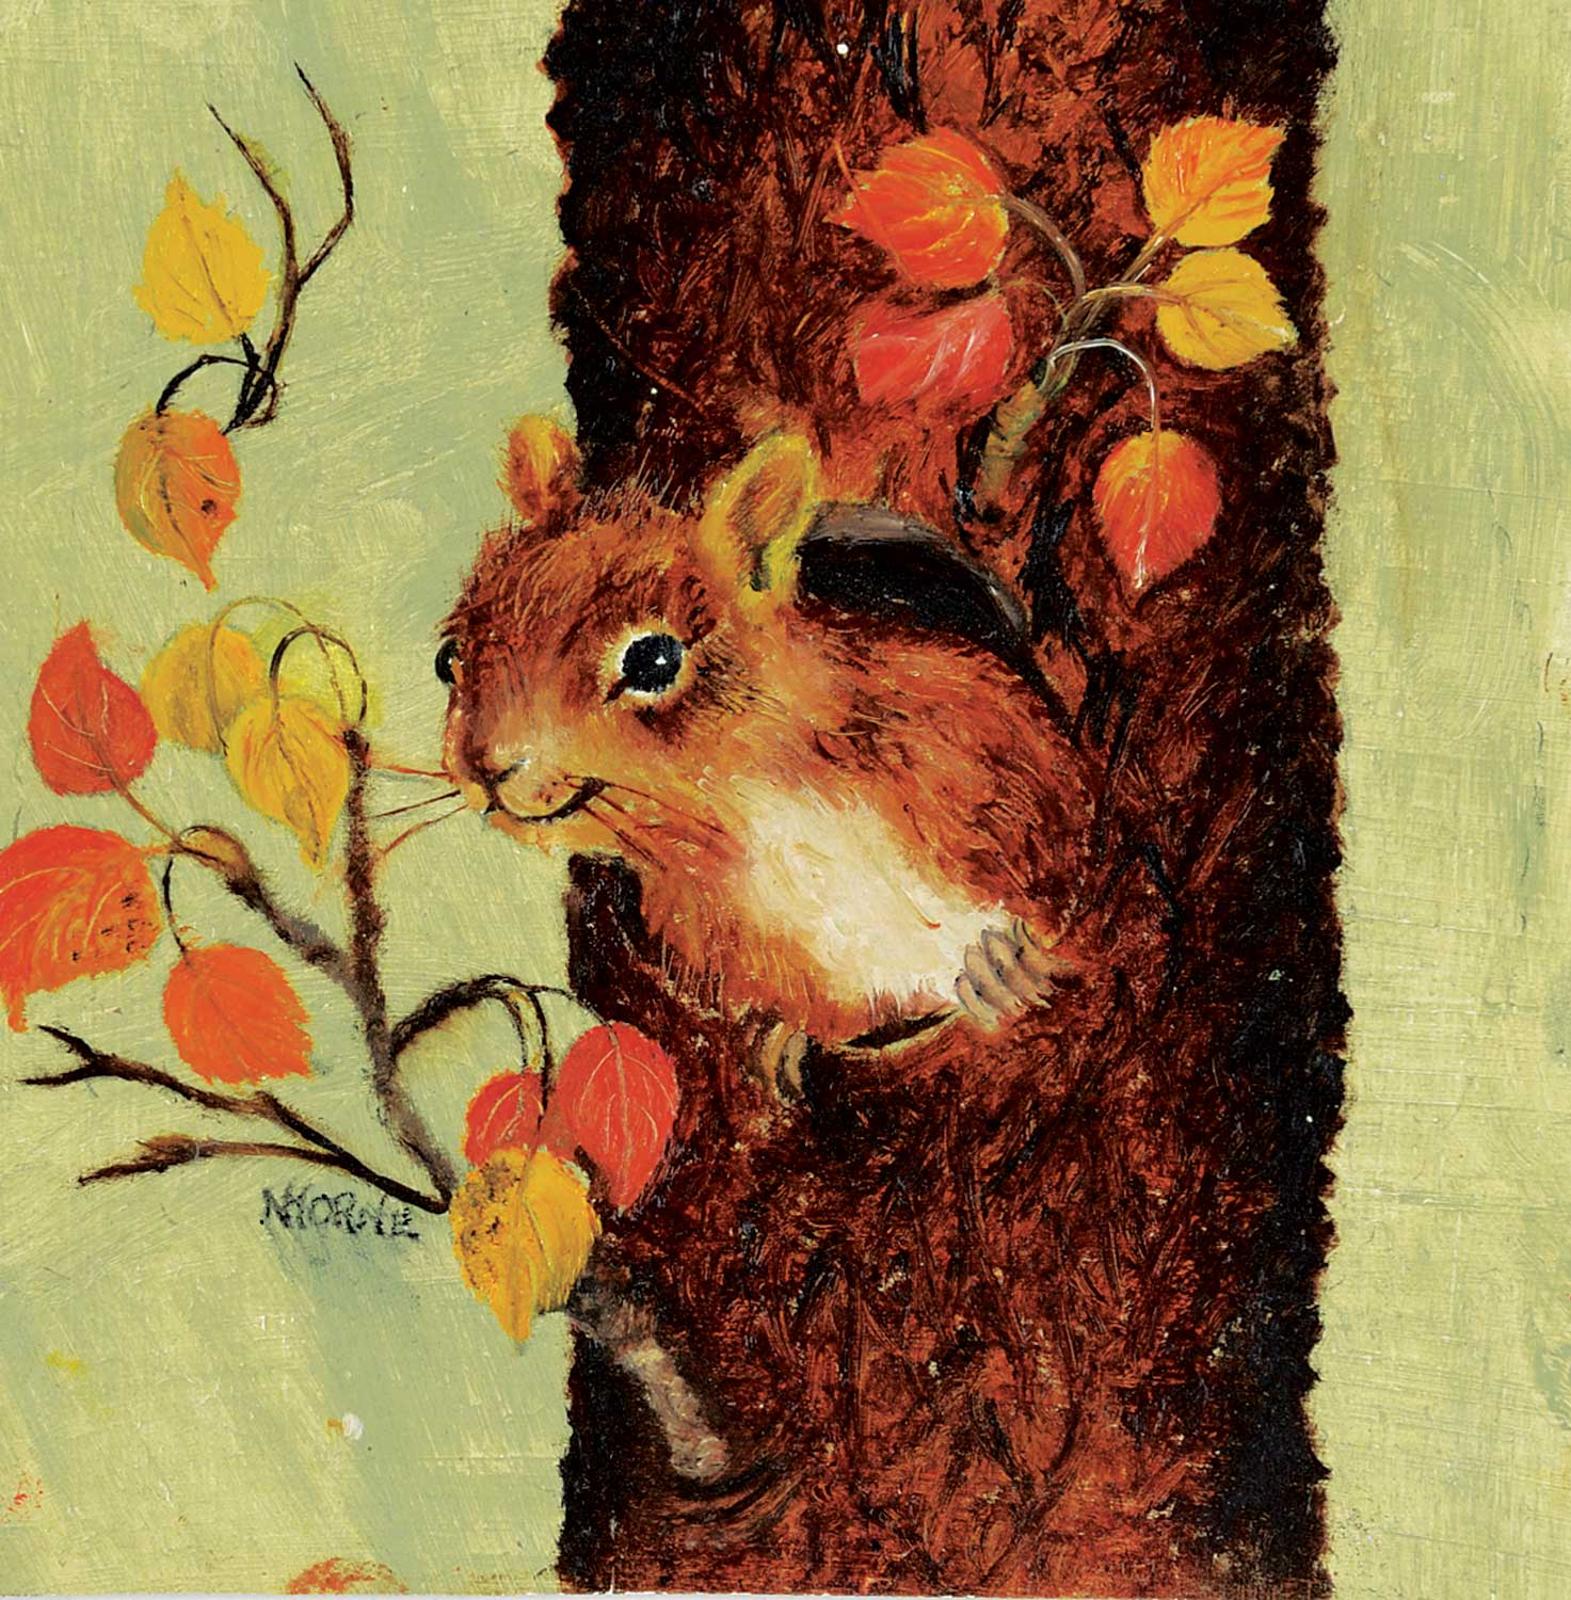 N. Horne - Untitled - Squirrel in a Tree